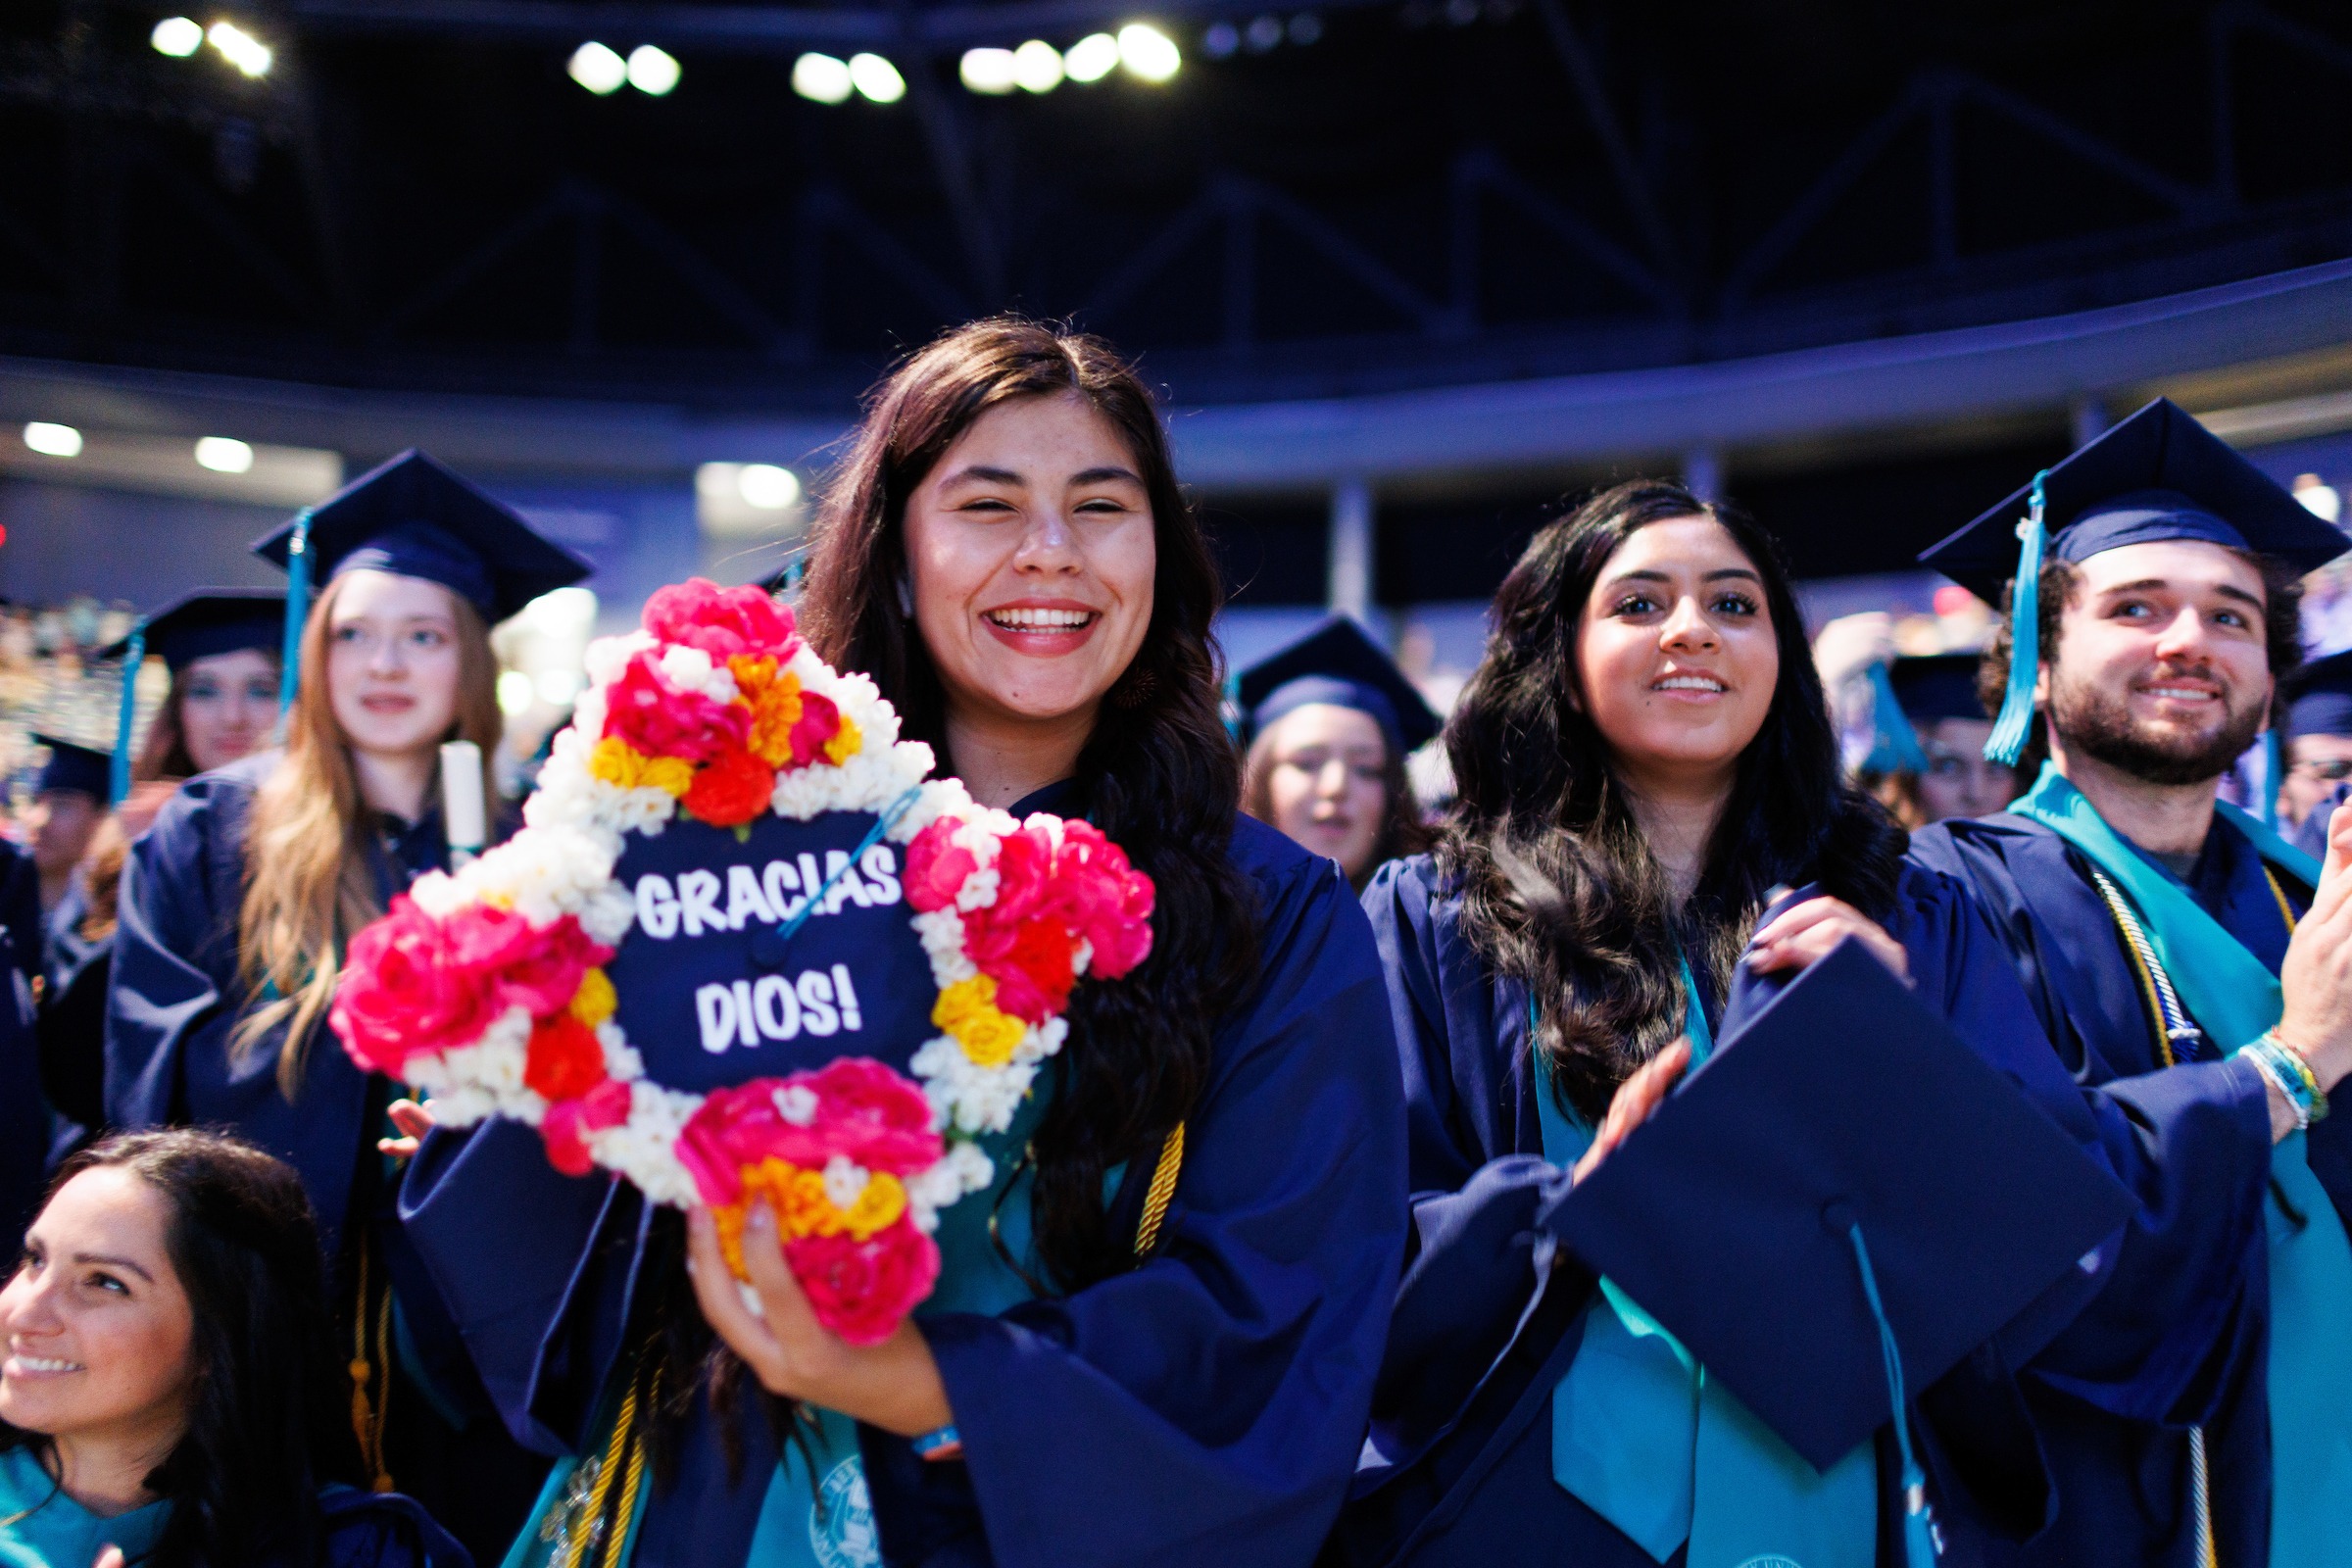 Female LUOA graduate showing her cap decorated with flowers and the words 